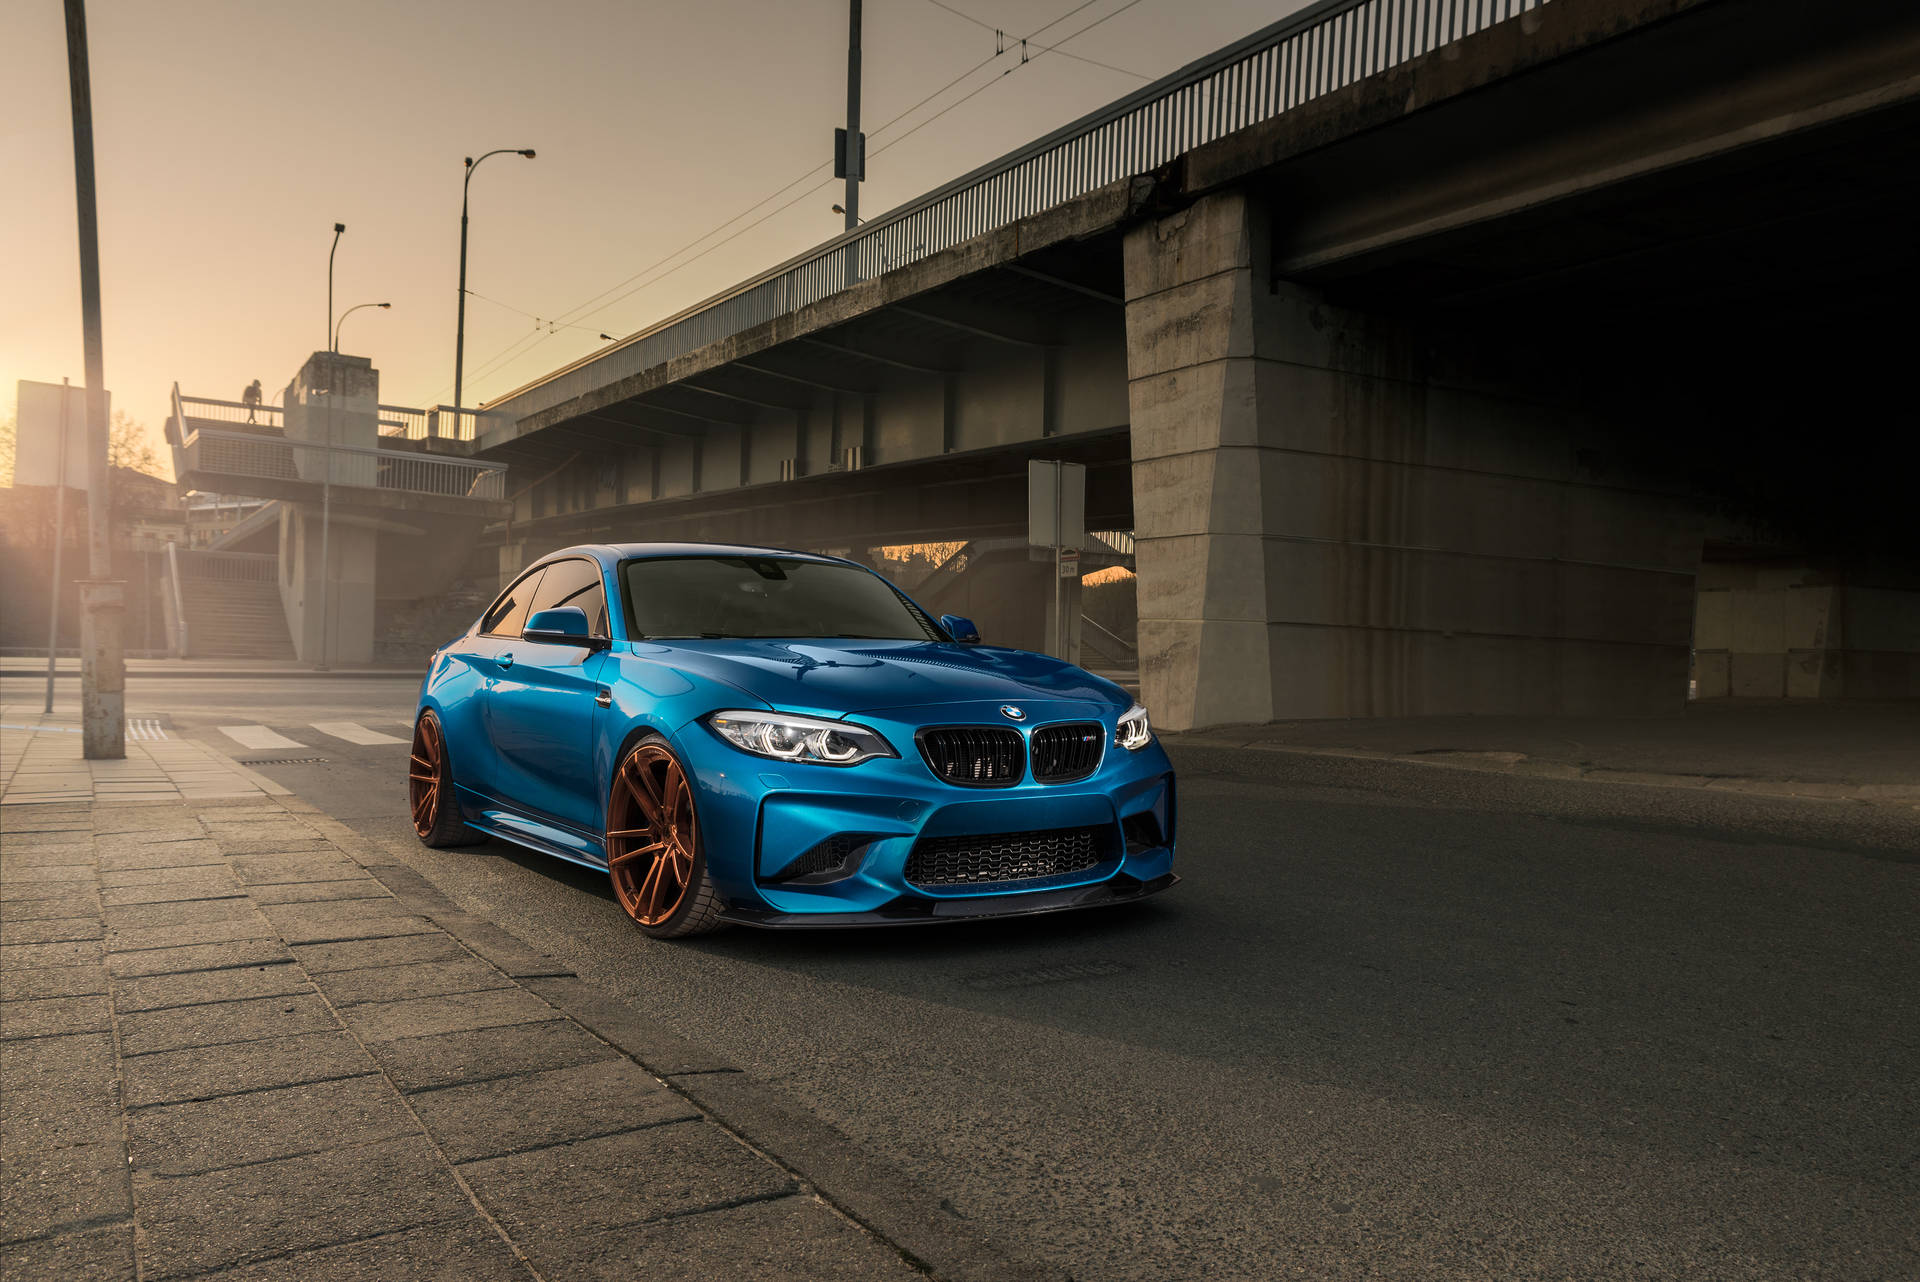 4k Bmw On The Road Wallpaper